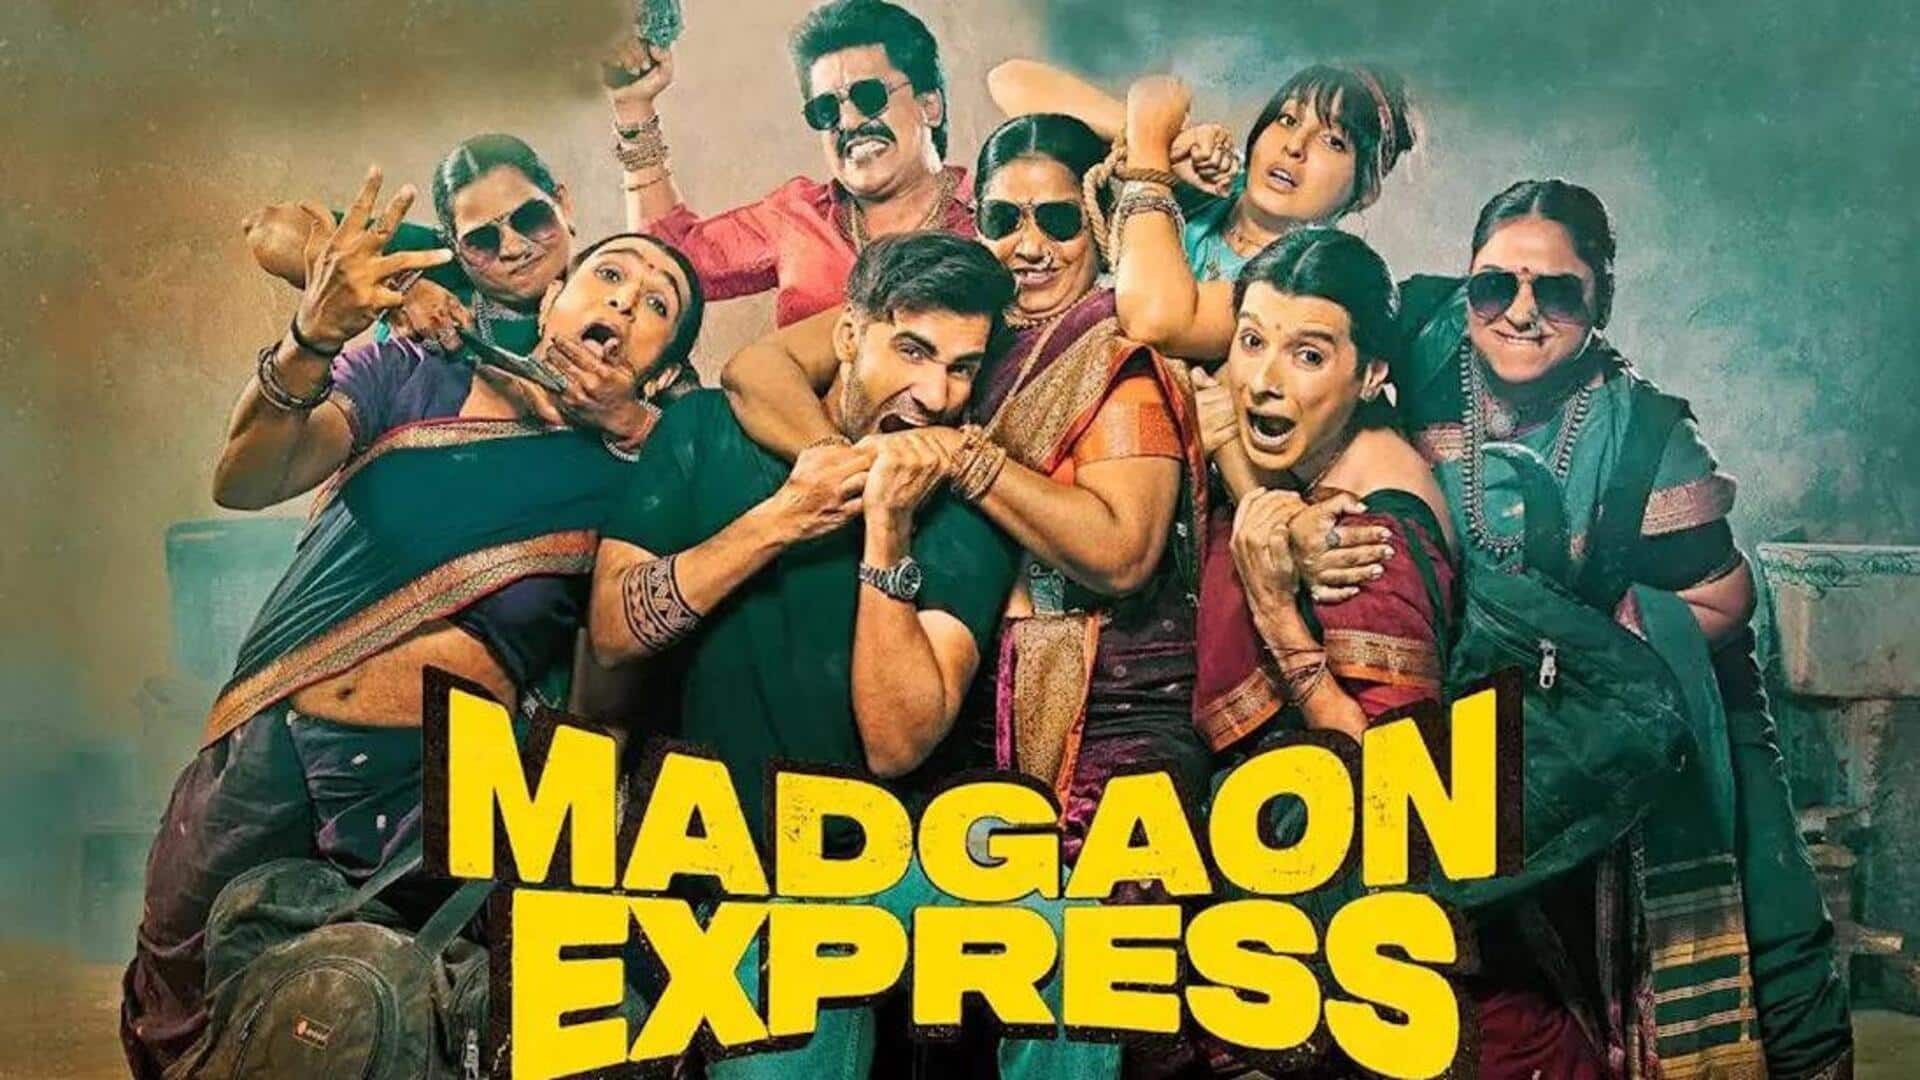 Box office collection: 'Madgaon Express' passes first Monday test